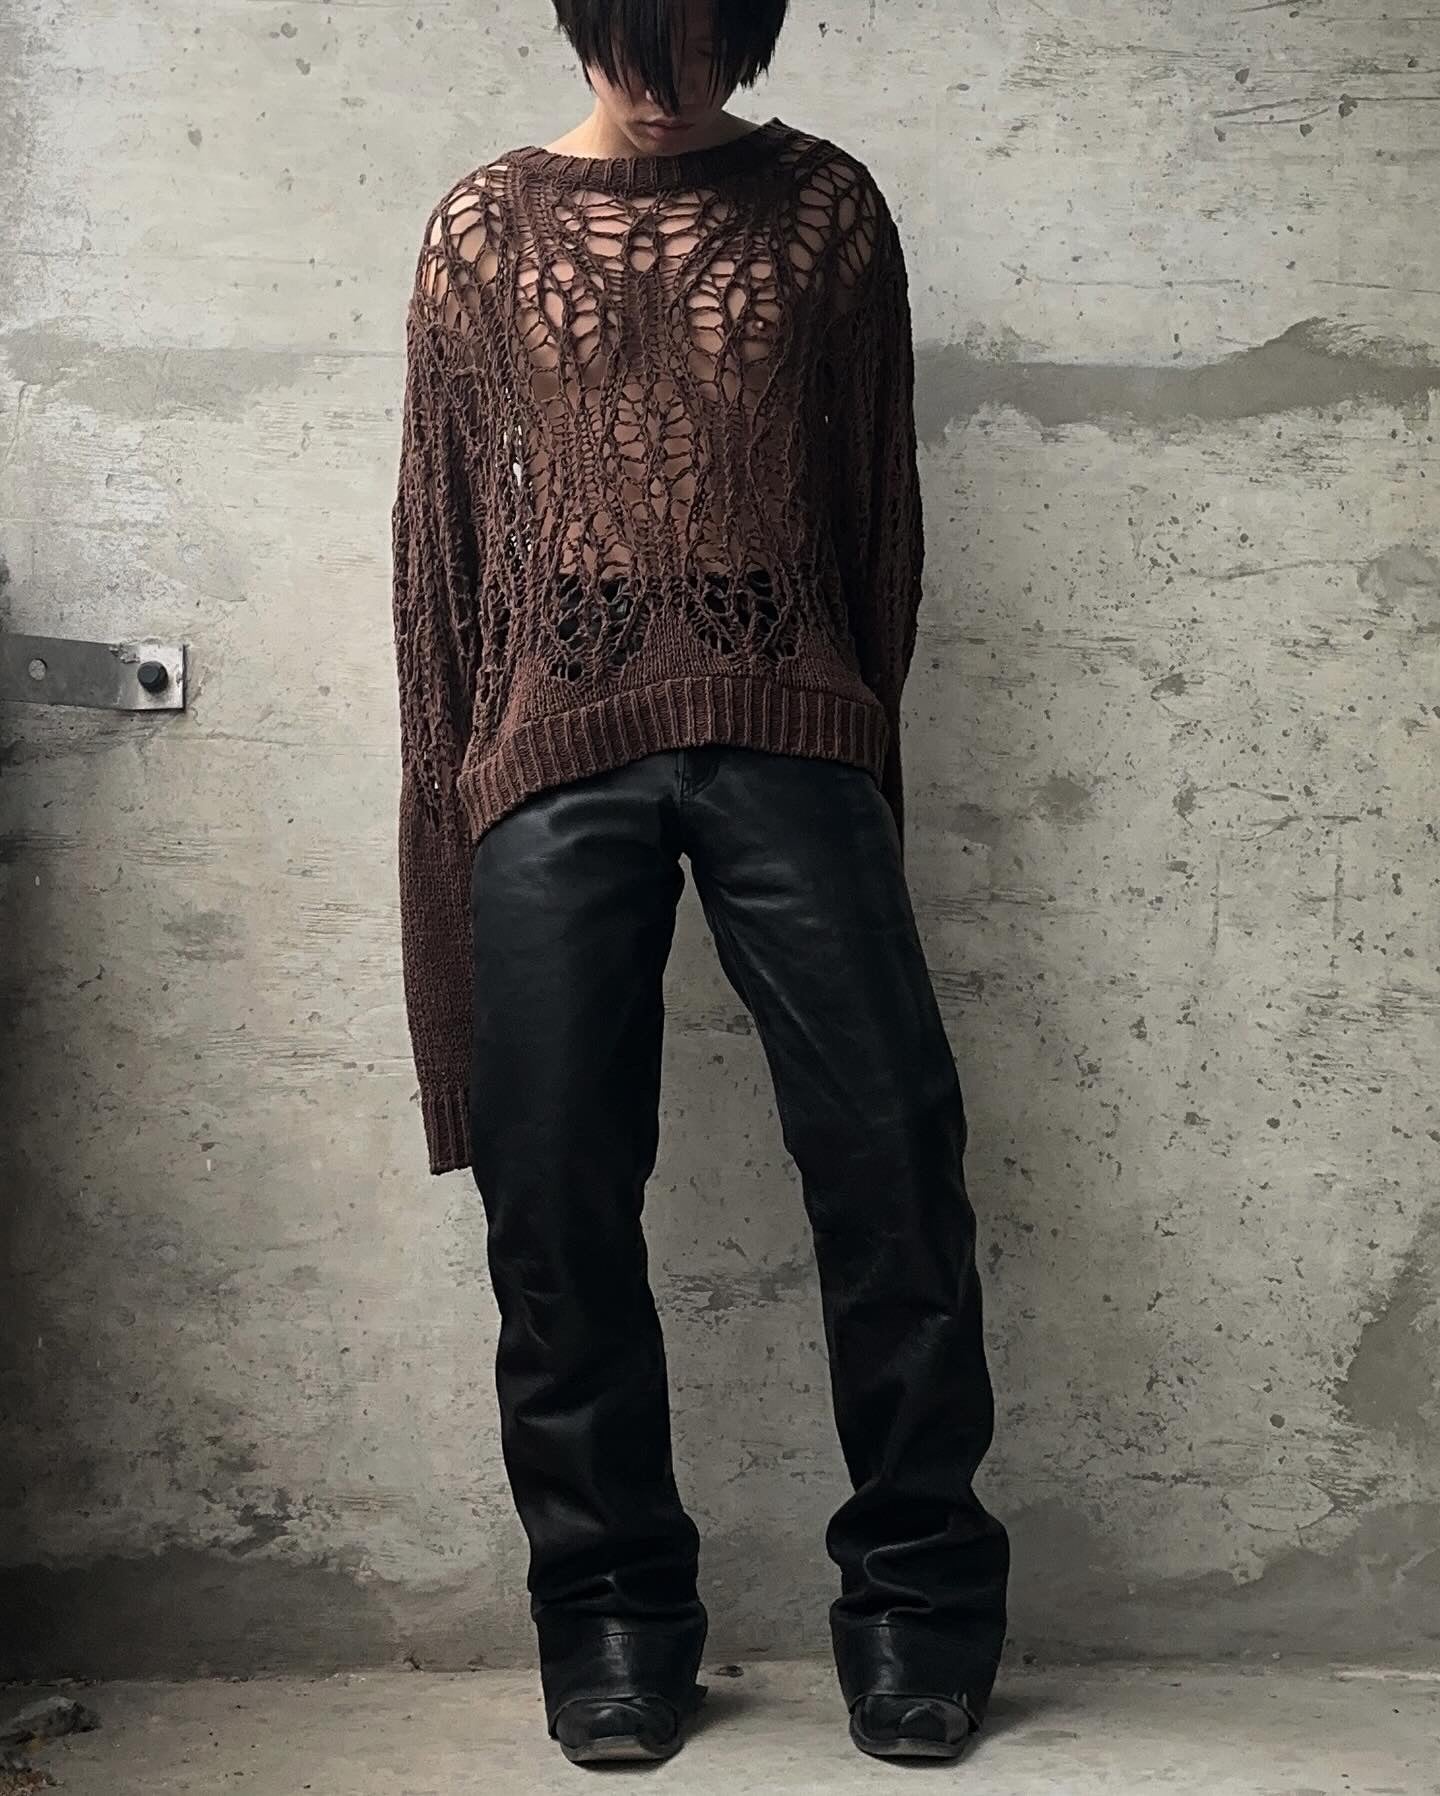 Lad Musician SS23 Lace Knit Crew Neck Sweater